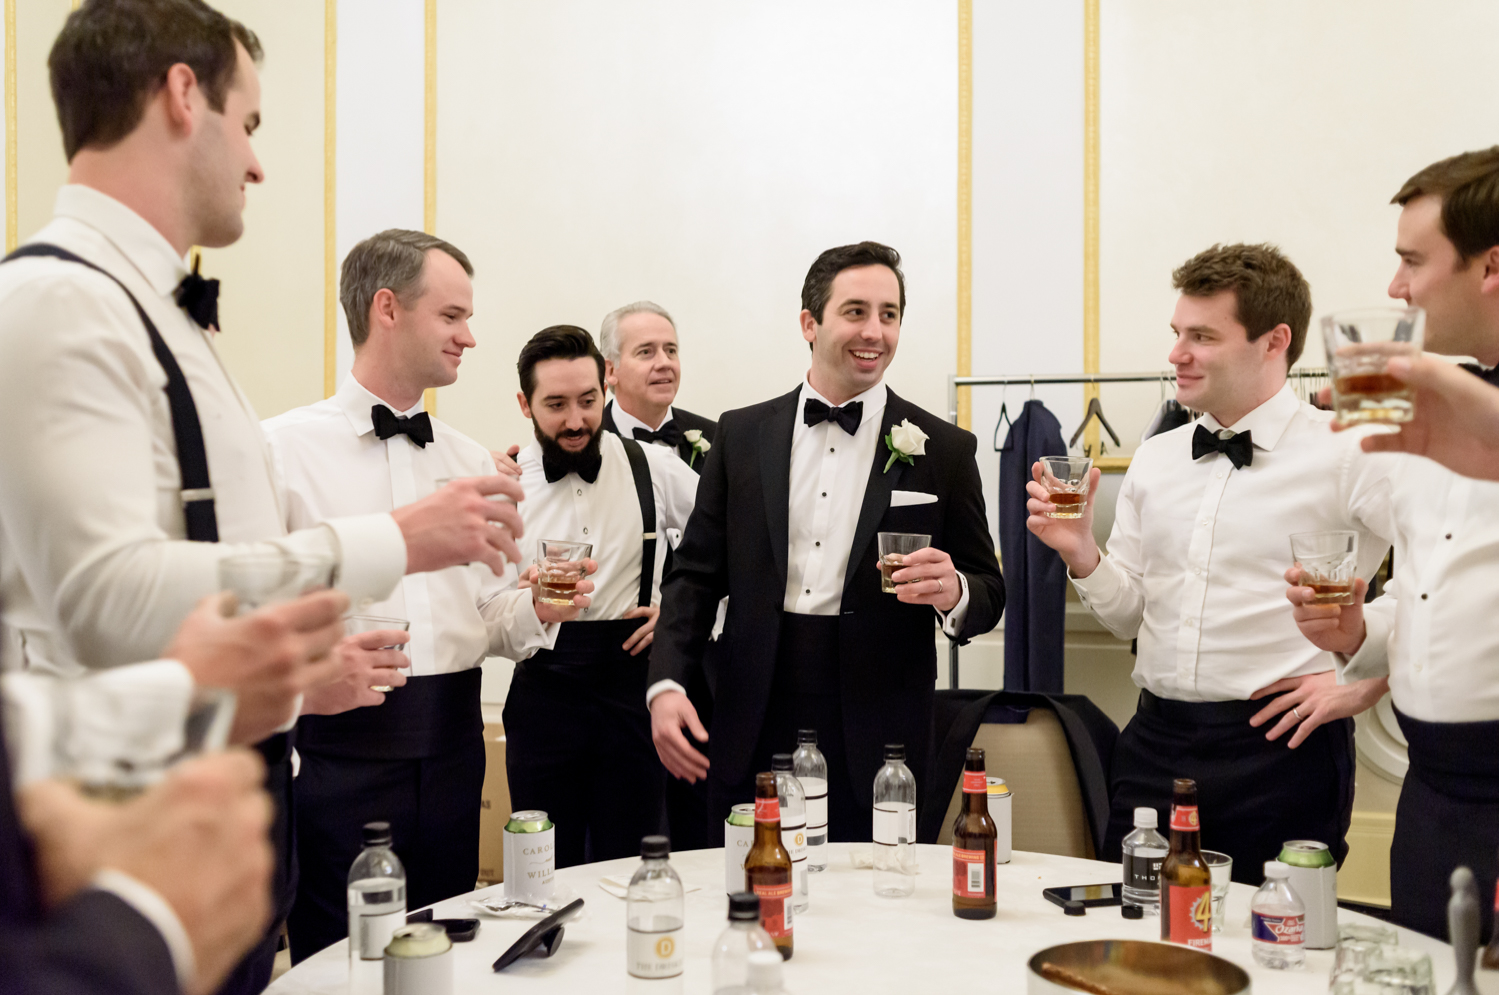 The groomsmen drink before the wedding and toast to the groom.